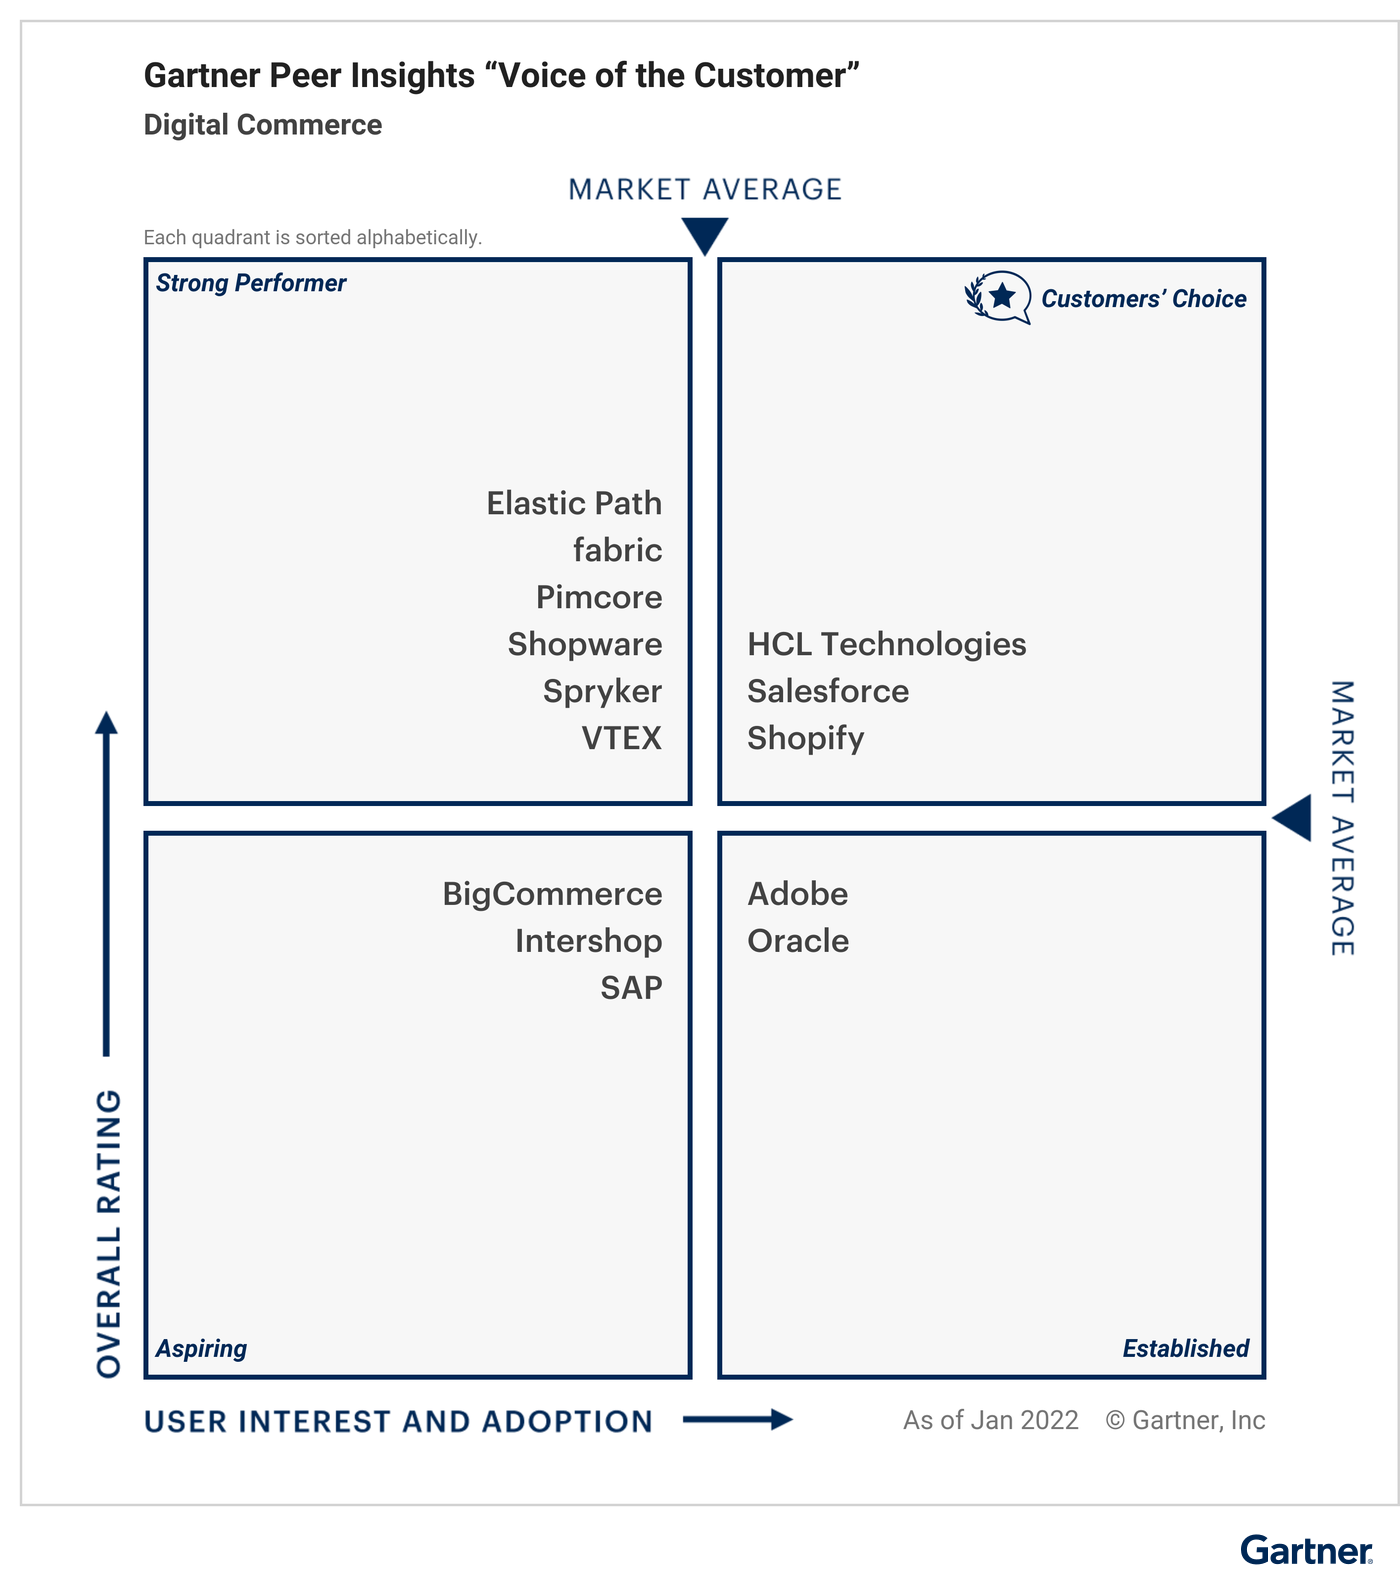 All vendors are classified under specific quadrants based on their “overall rating” and “user interest and adoption.” “Customers’ Choice” quadrant represents the highest overall rating and maximum user interest and adoption. 